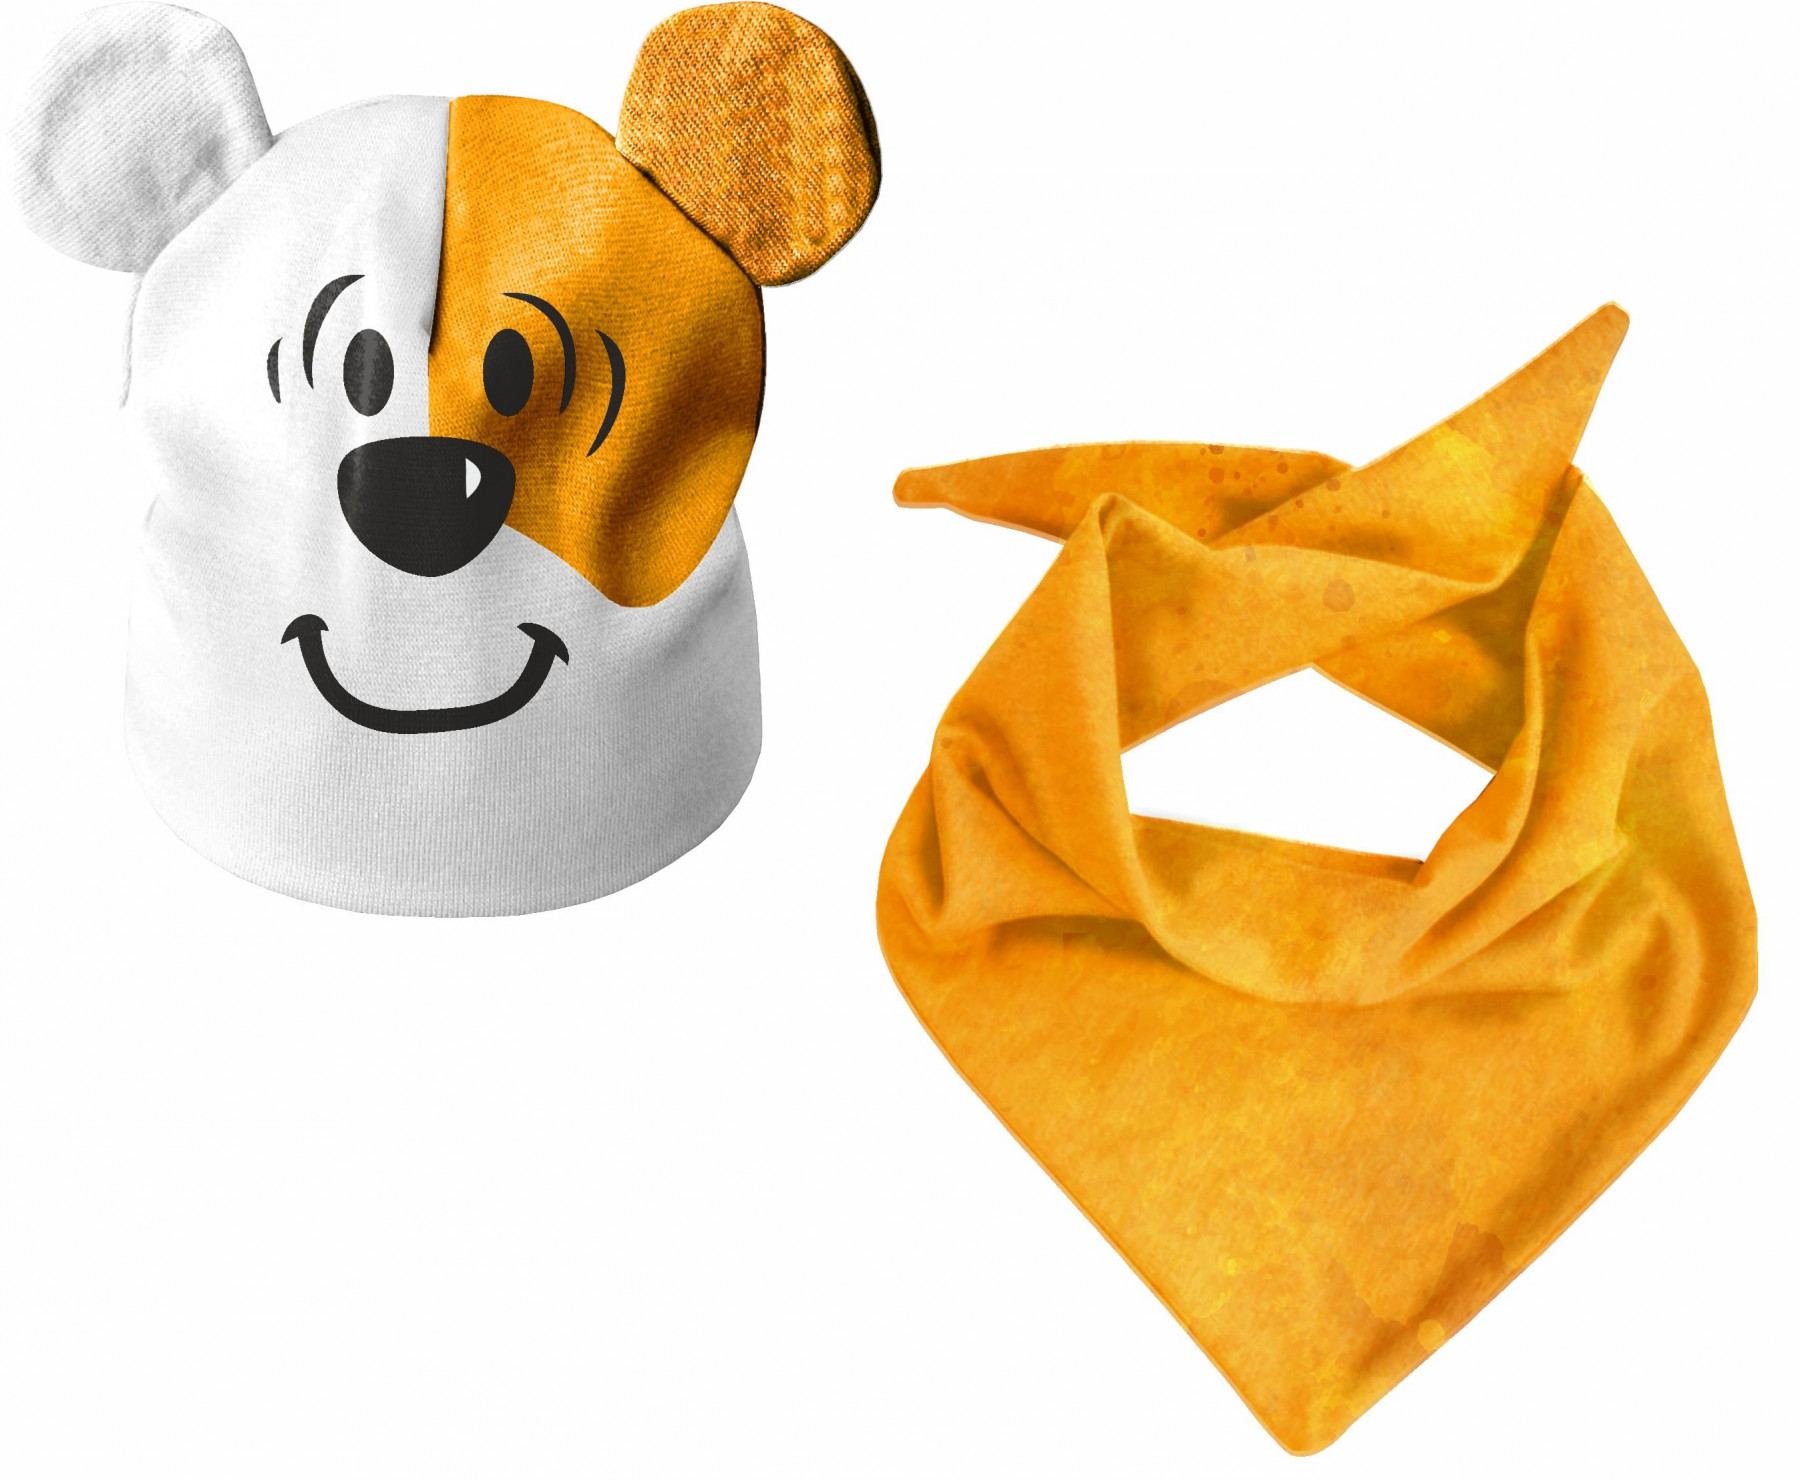 KID'S CAP AND SCARF (TEDDY) - DOG - sewing set